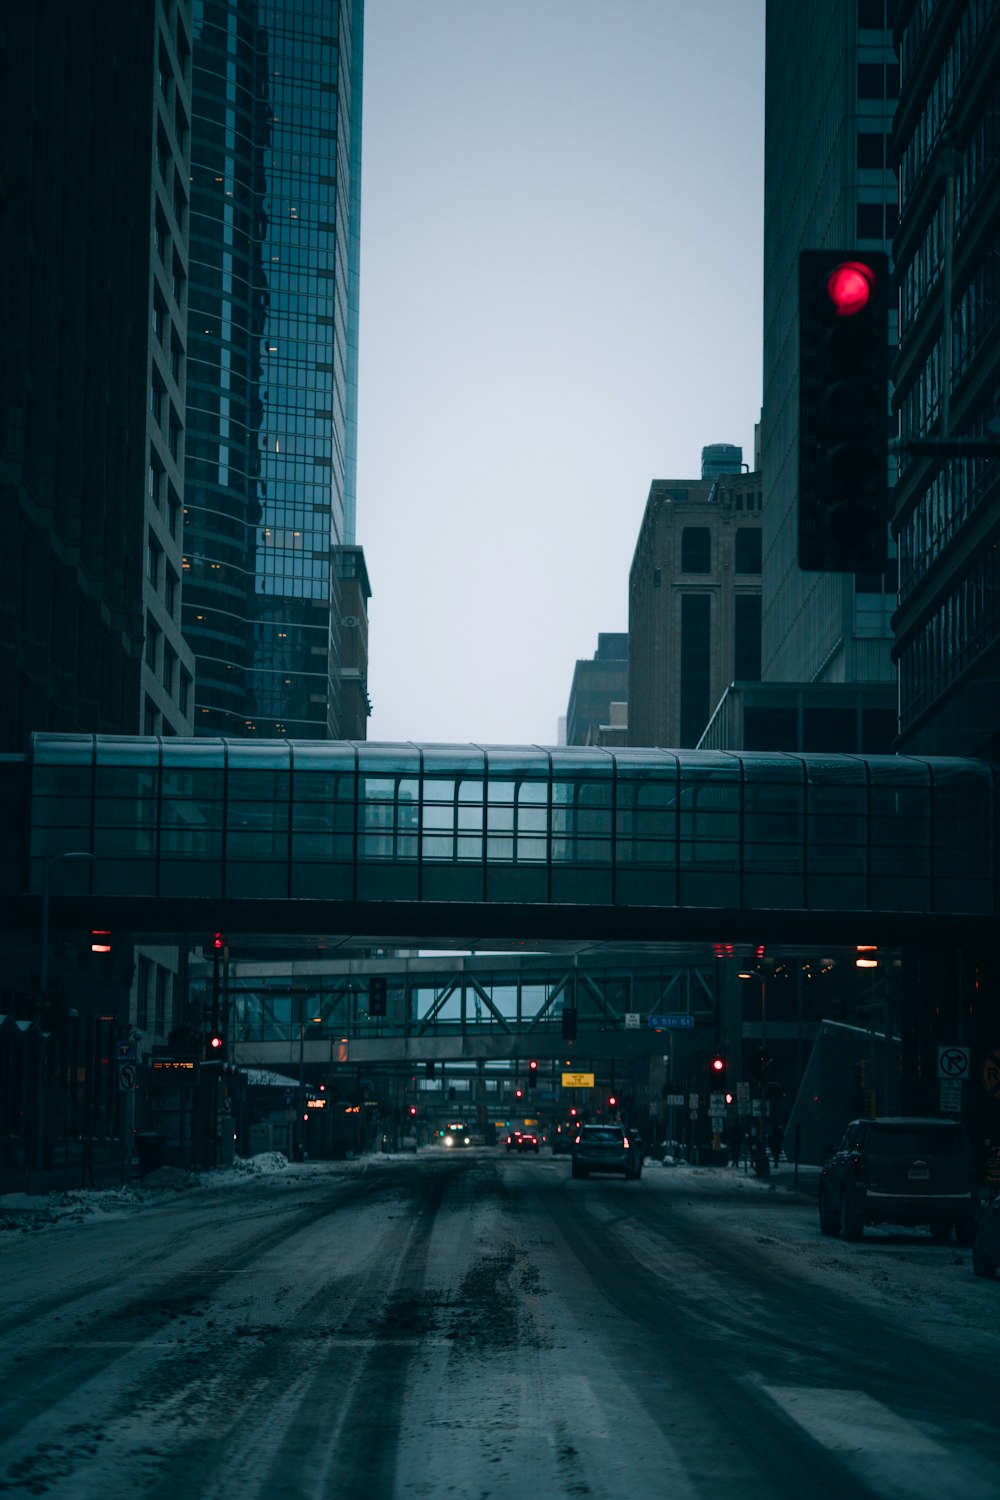 a red traffic light hanging over a city street